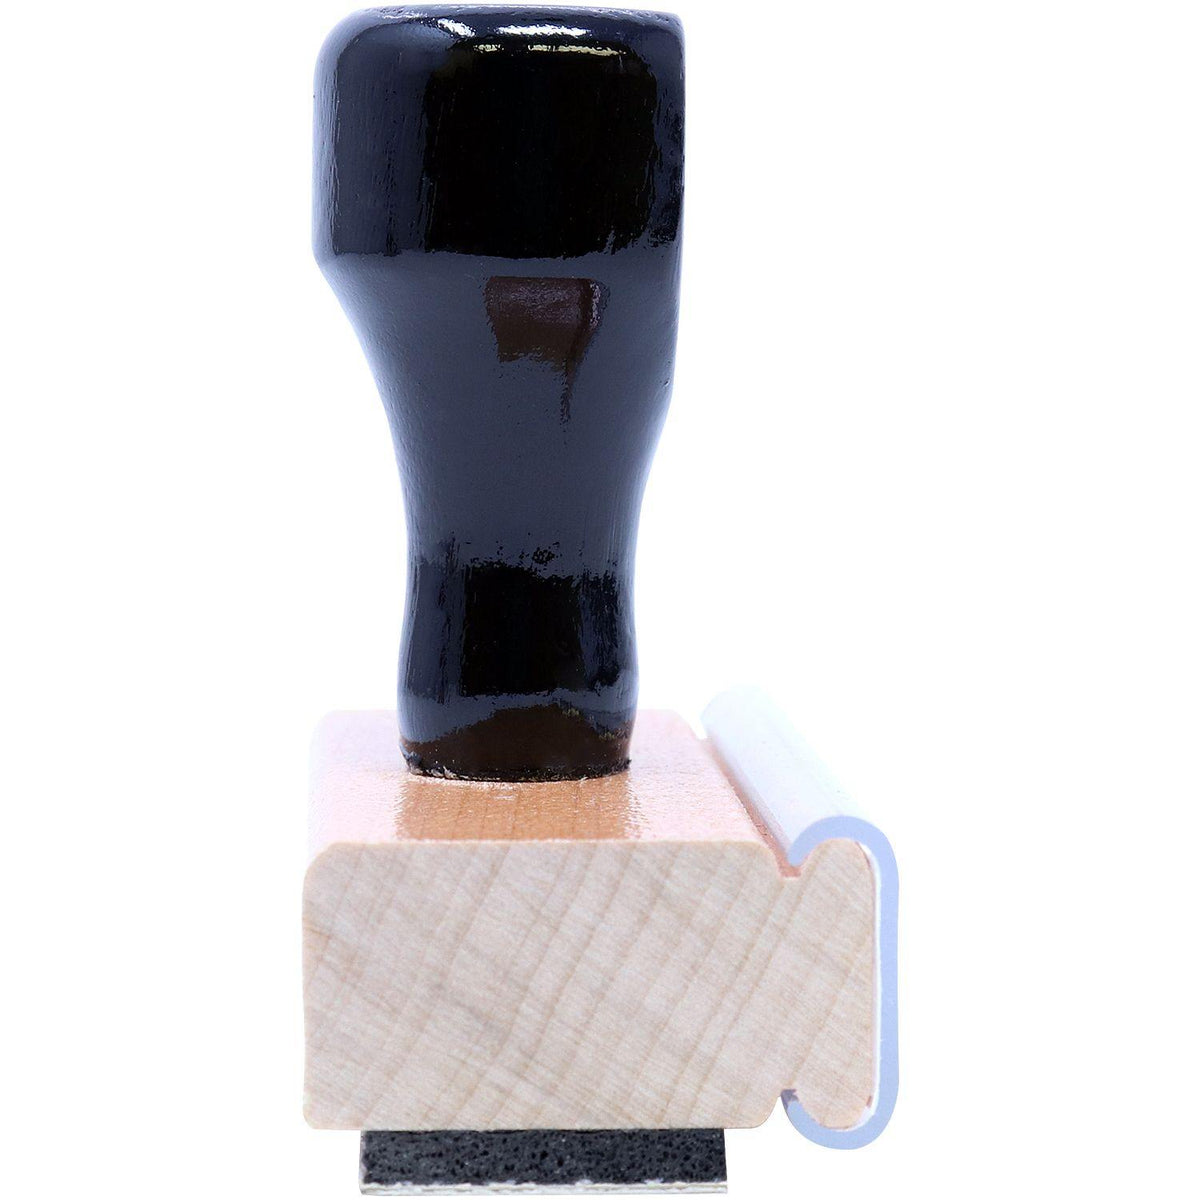 Side View of Large Joint Exhibit Rubber Stamp